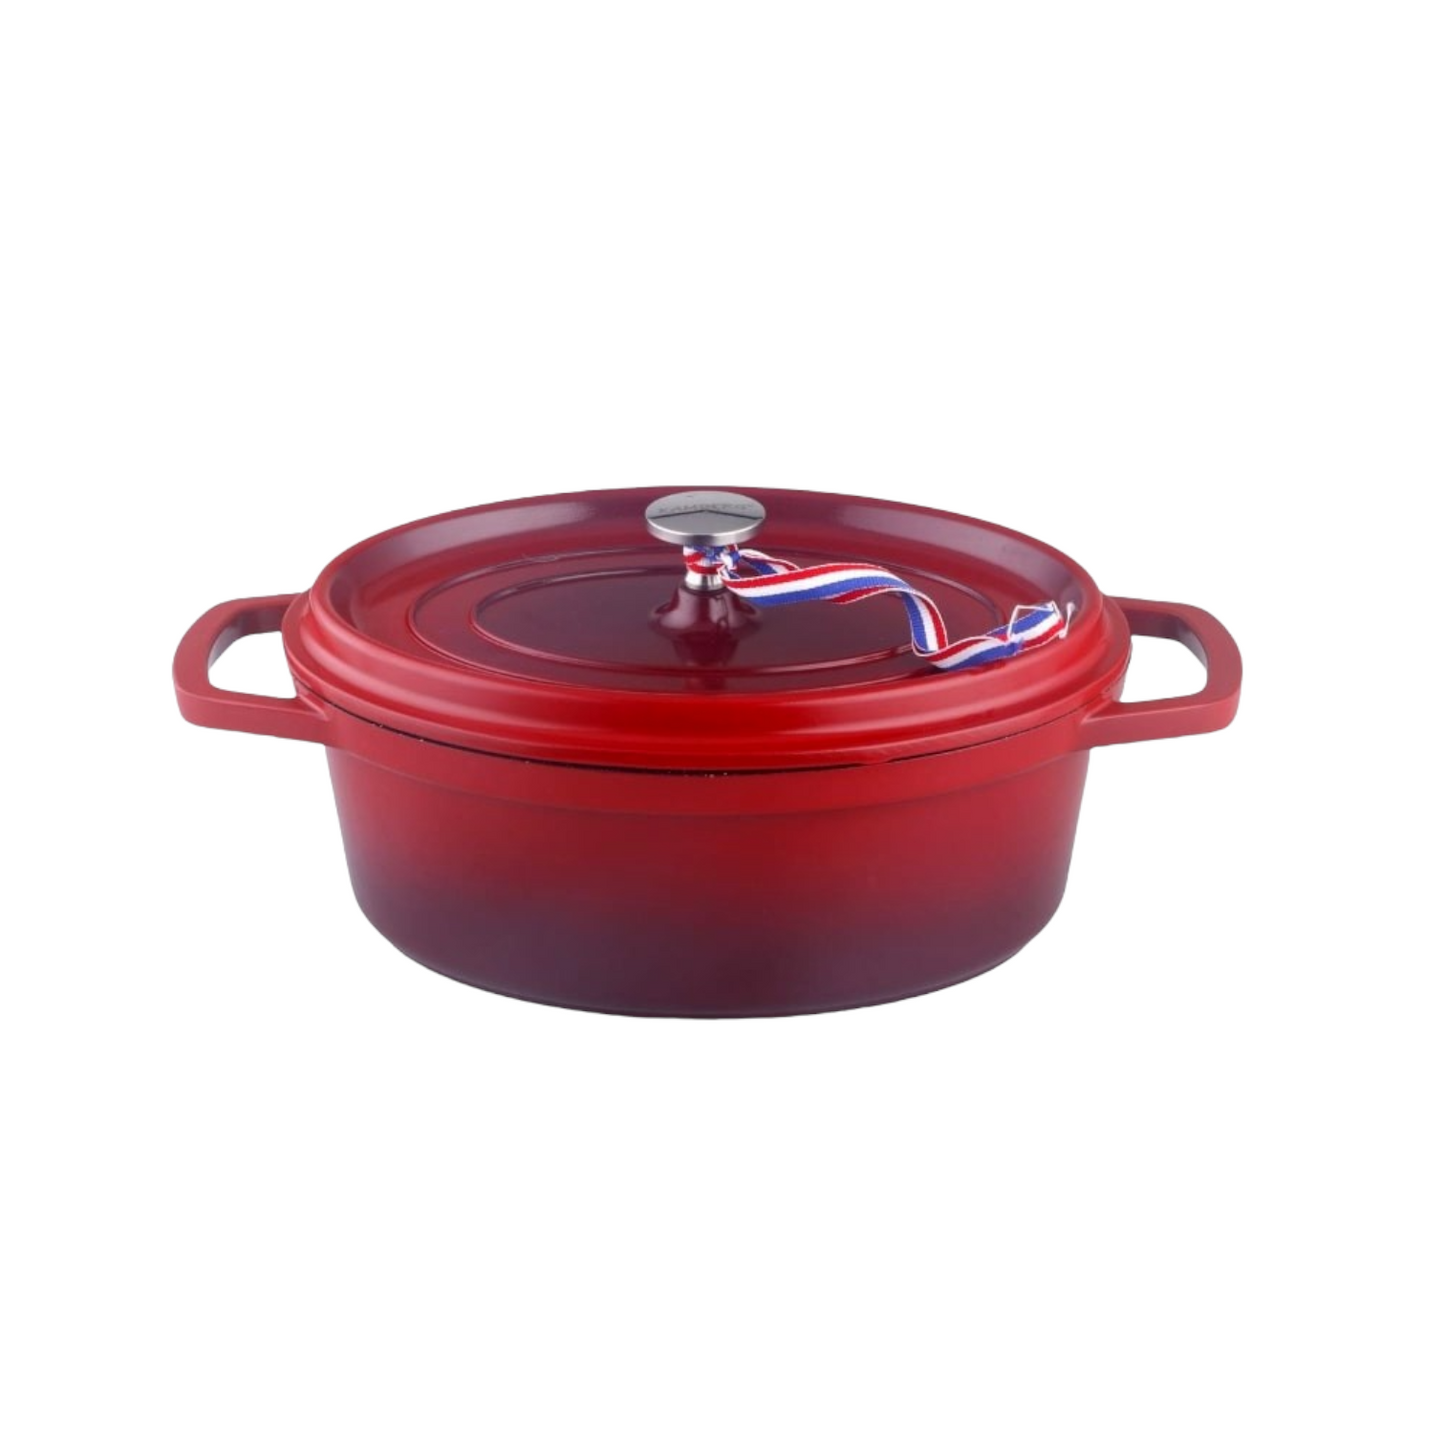 COCOT COTTE 30 CM RED OVAL CAST ALUMINUM KAMBERG®